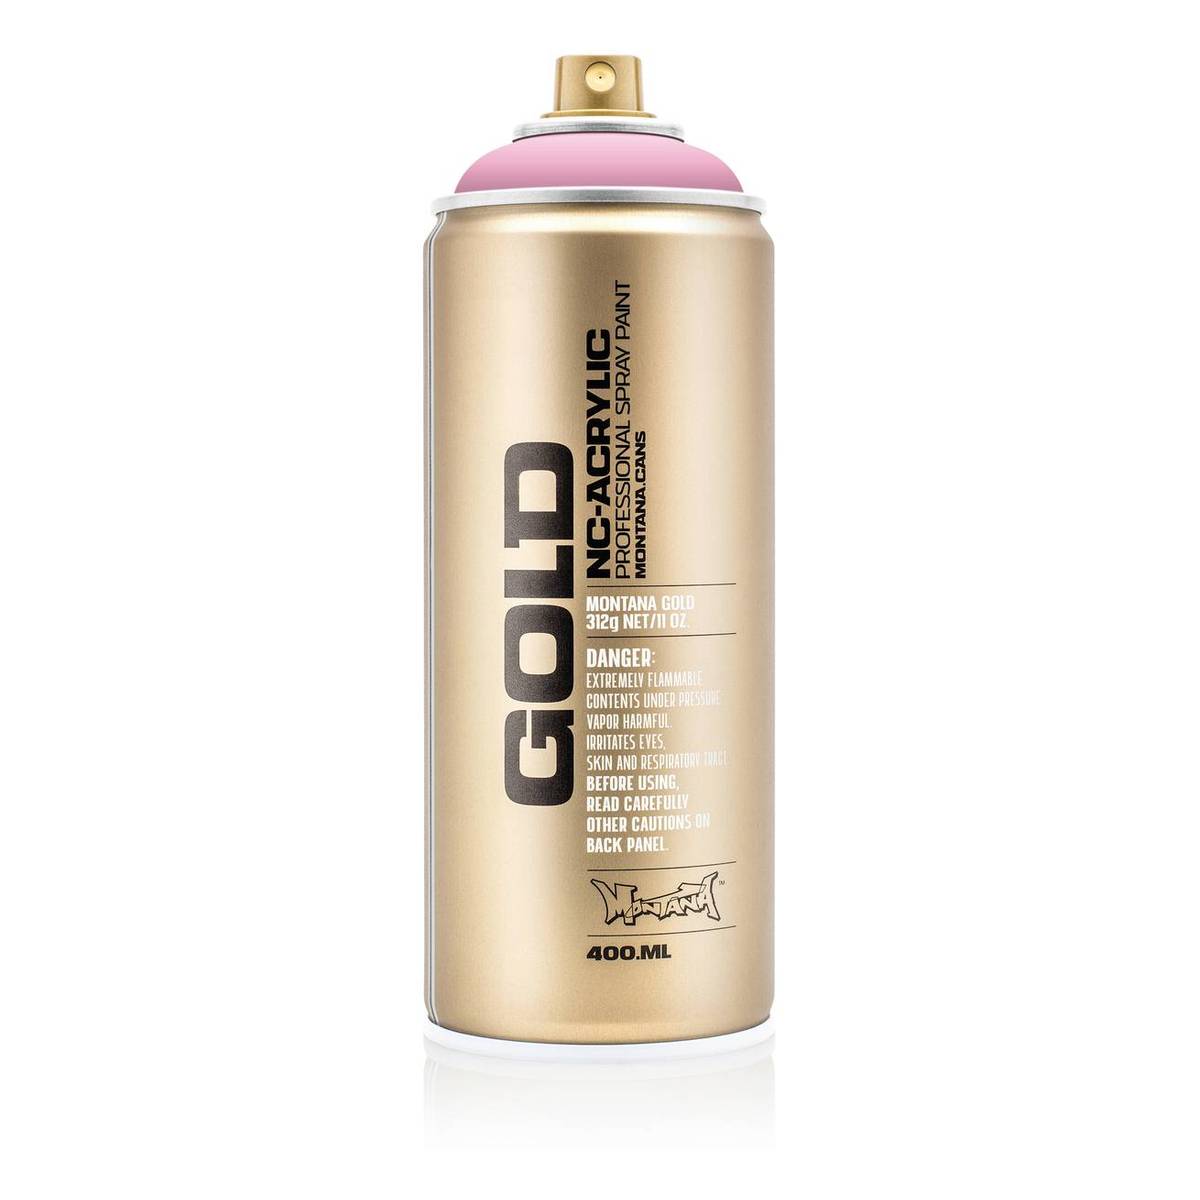 Magic paint, special Gold 500ml in Bottle (1 pc.) [COL-BC050070] - Packlinq